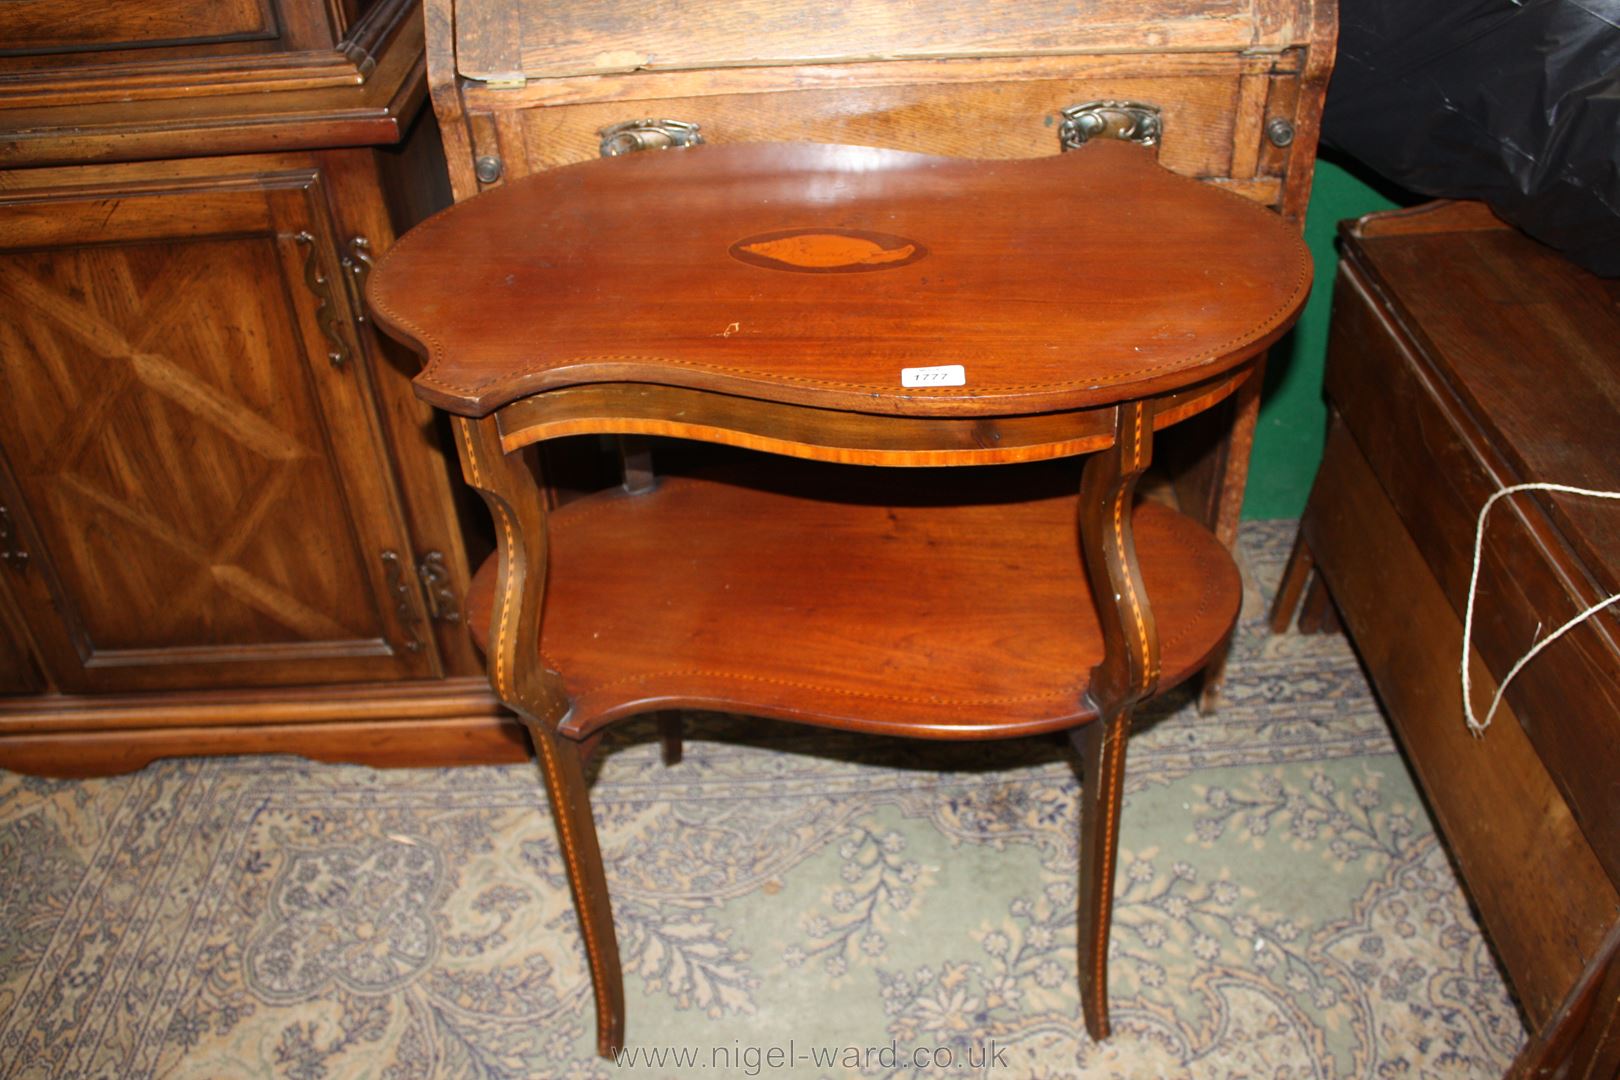 An elegant Edwardian Mahogany two tier occasional Table having stylized 'S' shaped top and lower